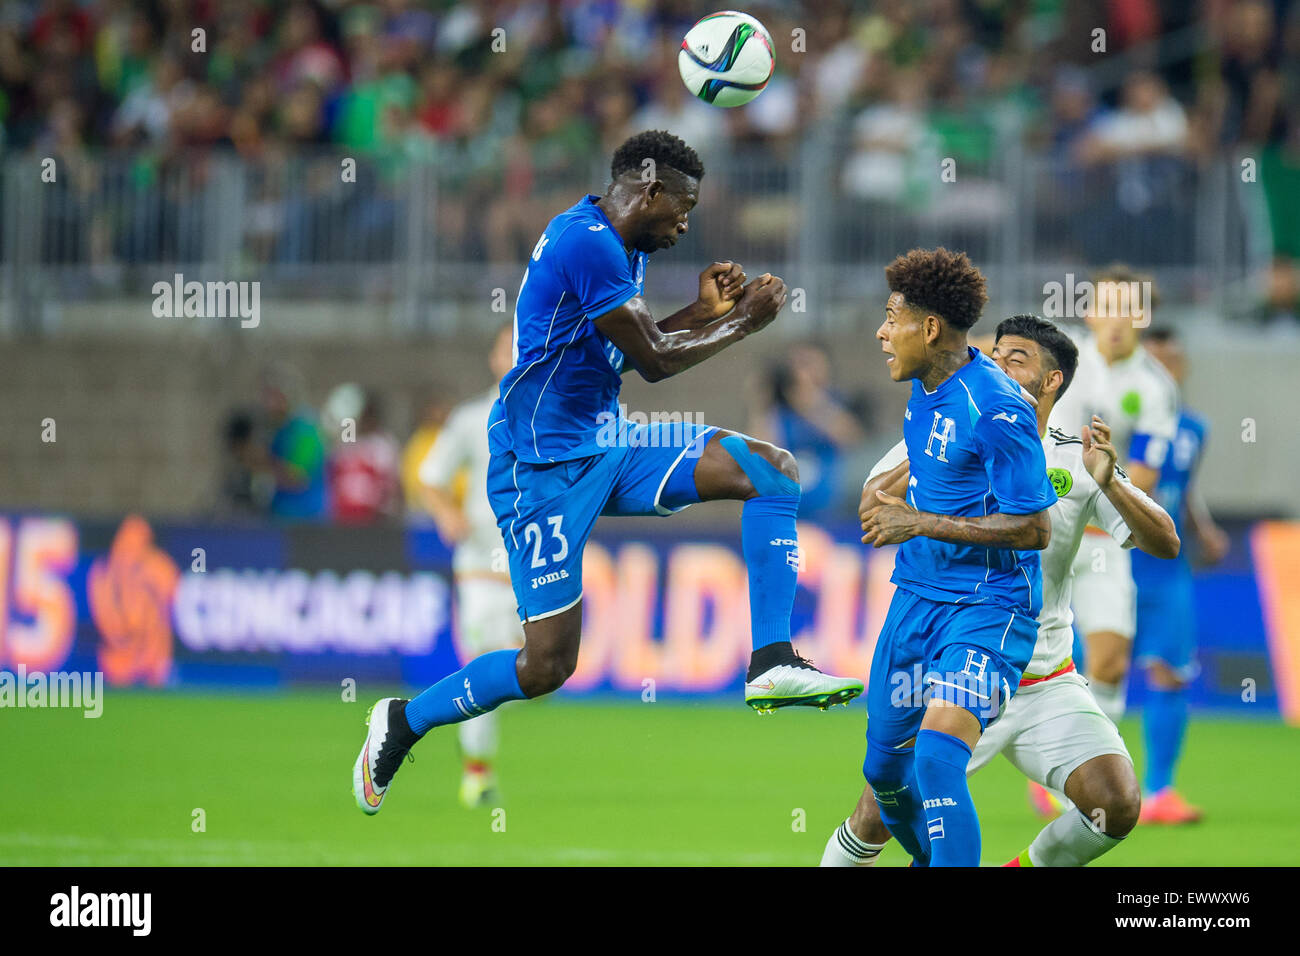 Houston, TX, USA. 1st July, 2015. Honduras defender Johnny Palacios (23) heads the ball during the 1st half of an international soccer match between Honduras and Mexico at NRG Stadium in Houston, TX. Trask Smith/CSM/Alamy Live News Stock Photo